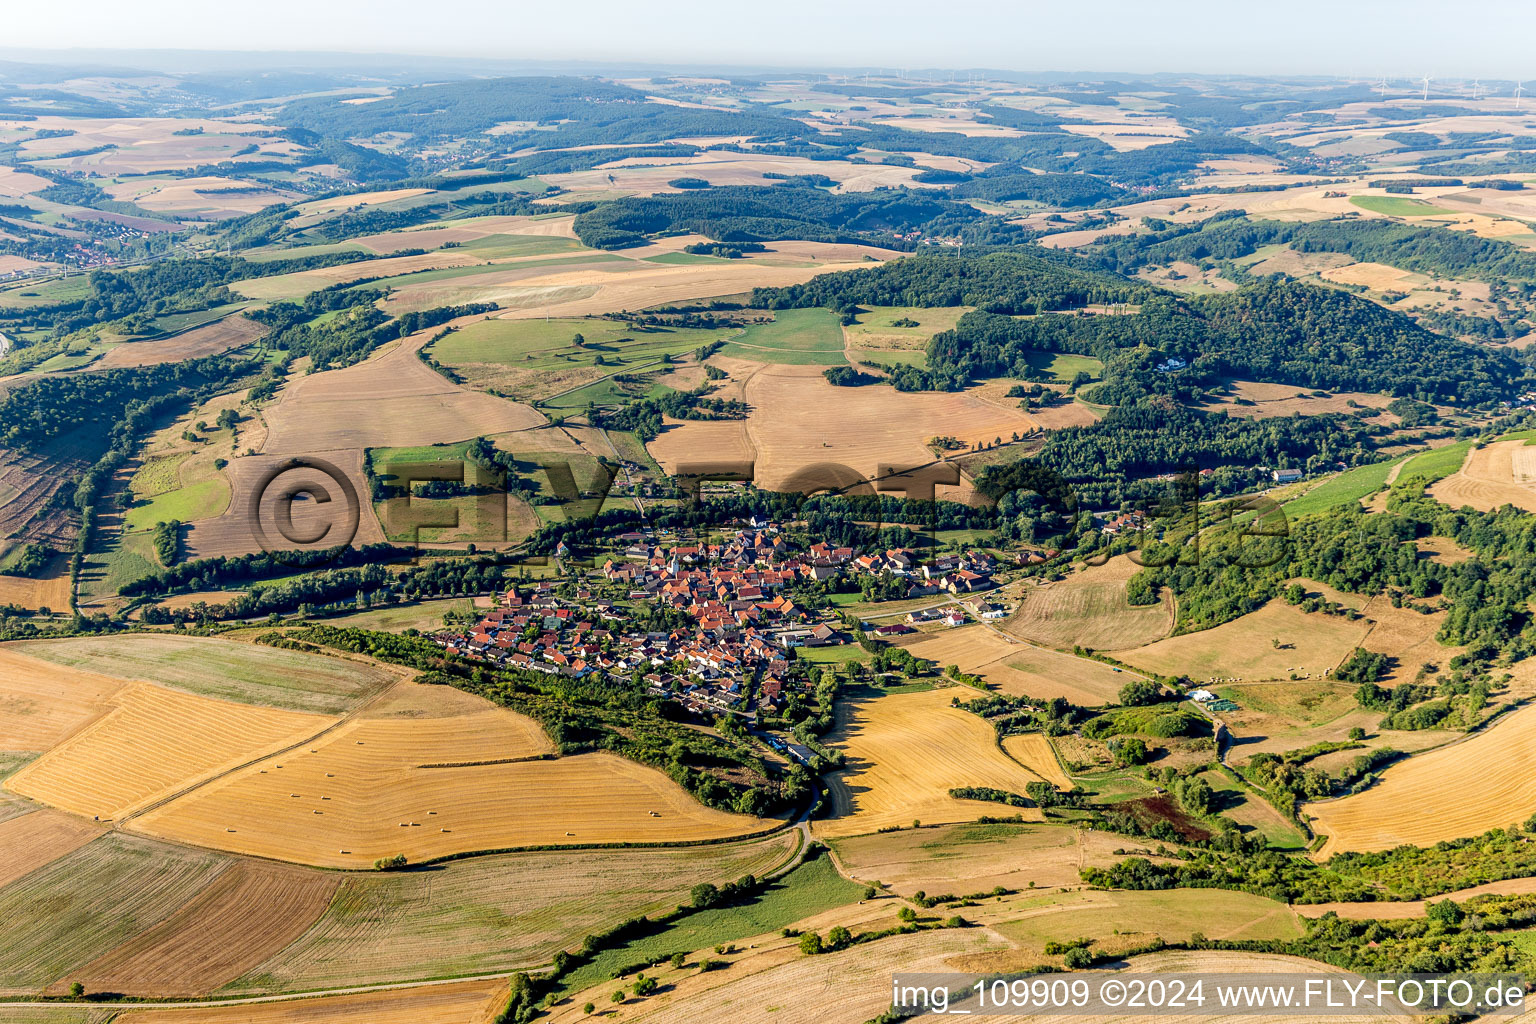 Aerial view of Agricultural land and field borders surround the settlement area of the village in Niedermoschel in the state Rhineland-Palatinate, Germany